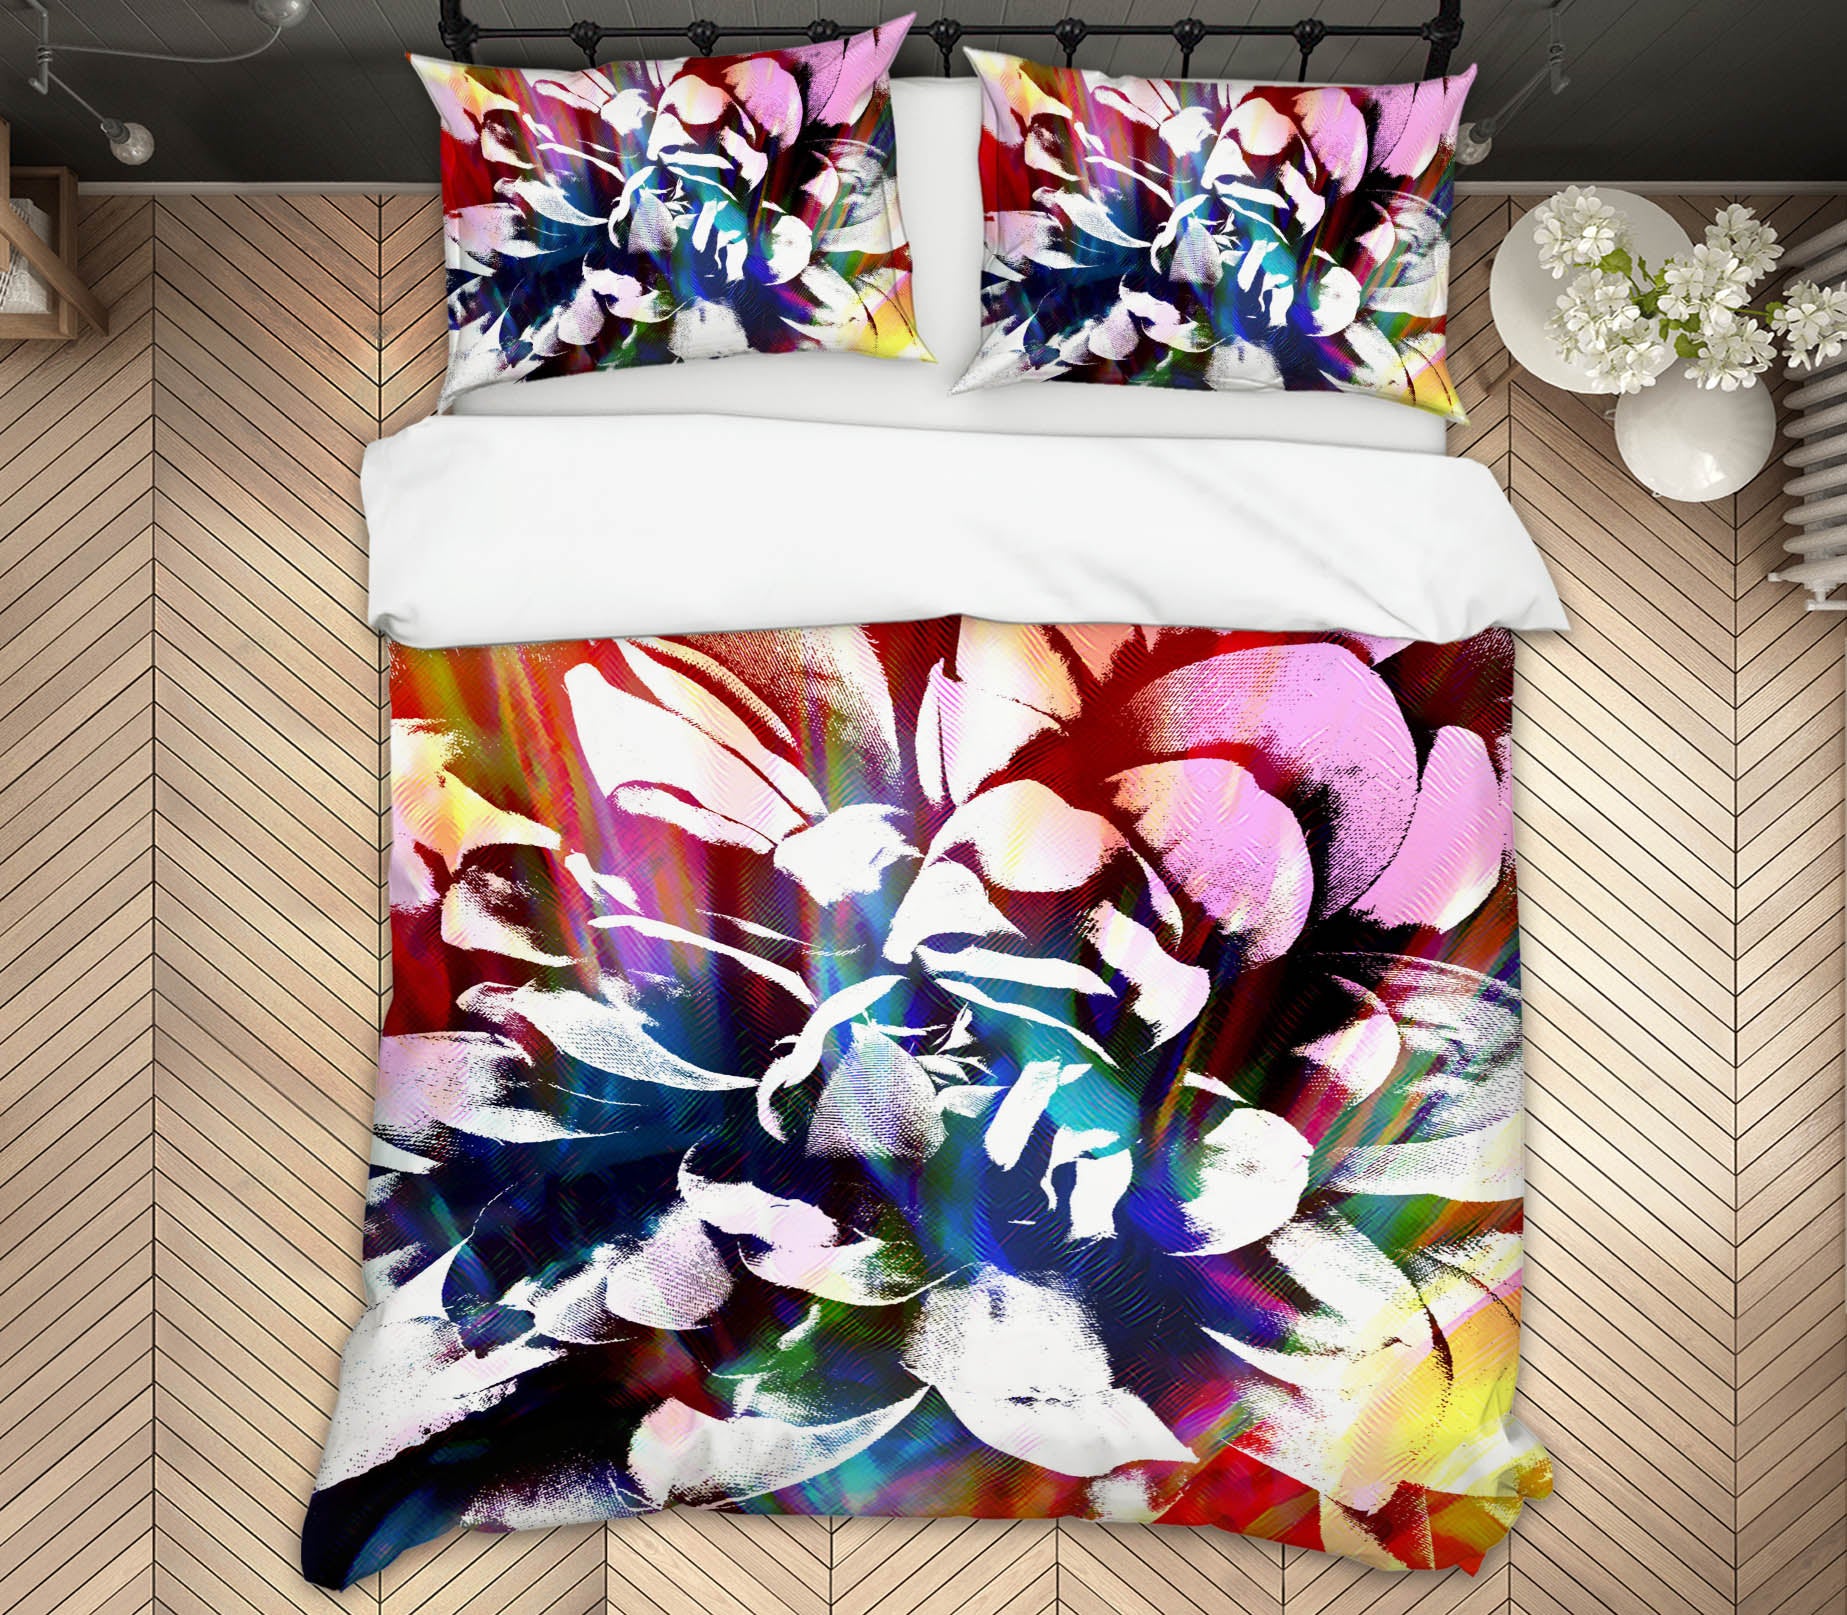 3D Flowers 19140 Shandra Smith Bedding Bed Pillowcases Quilt